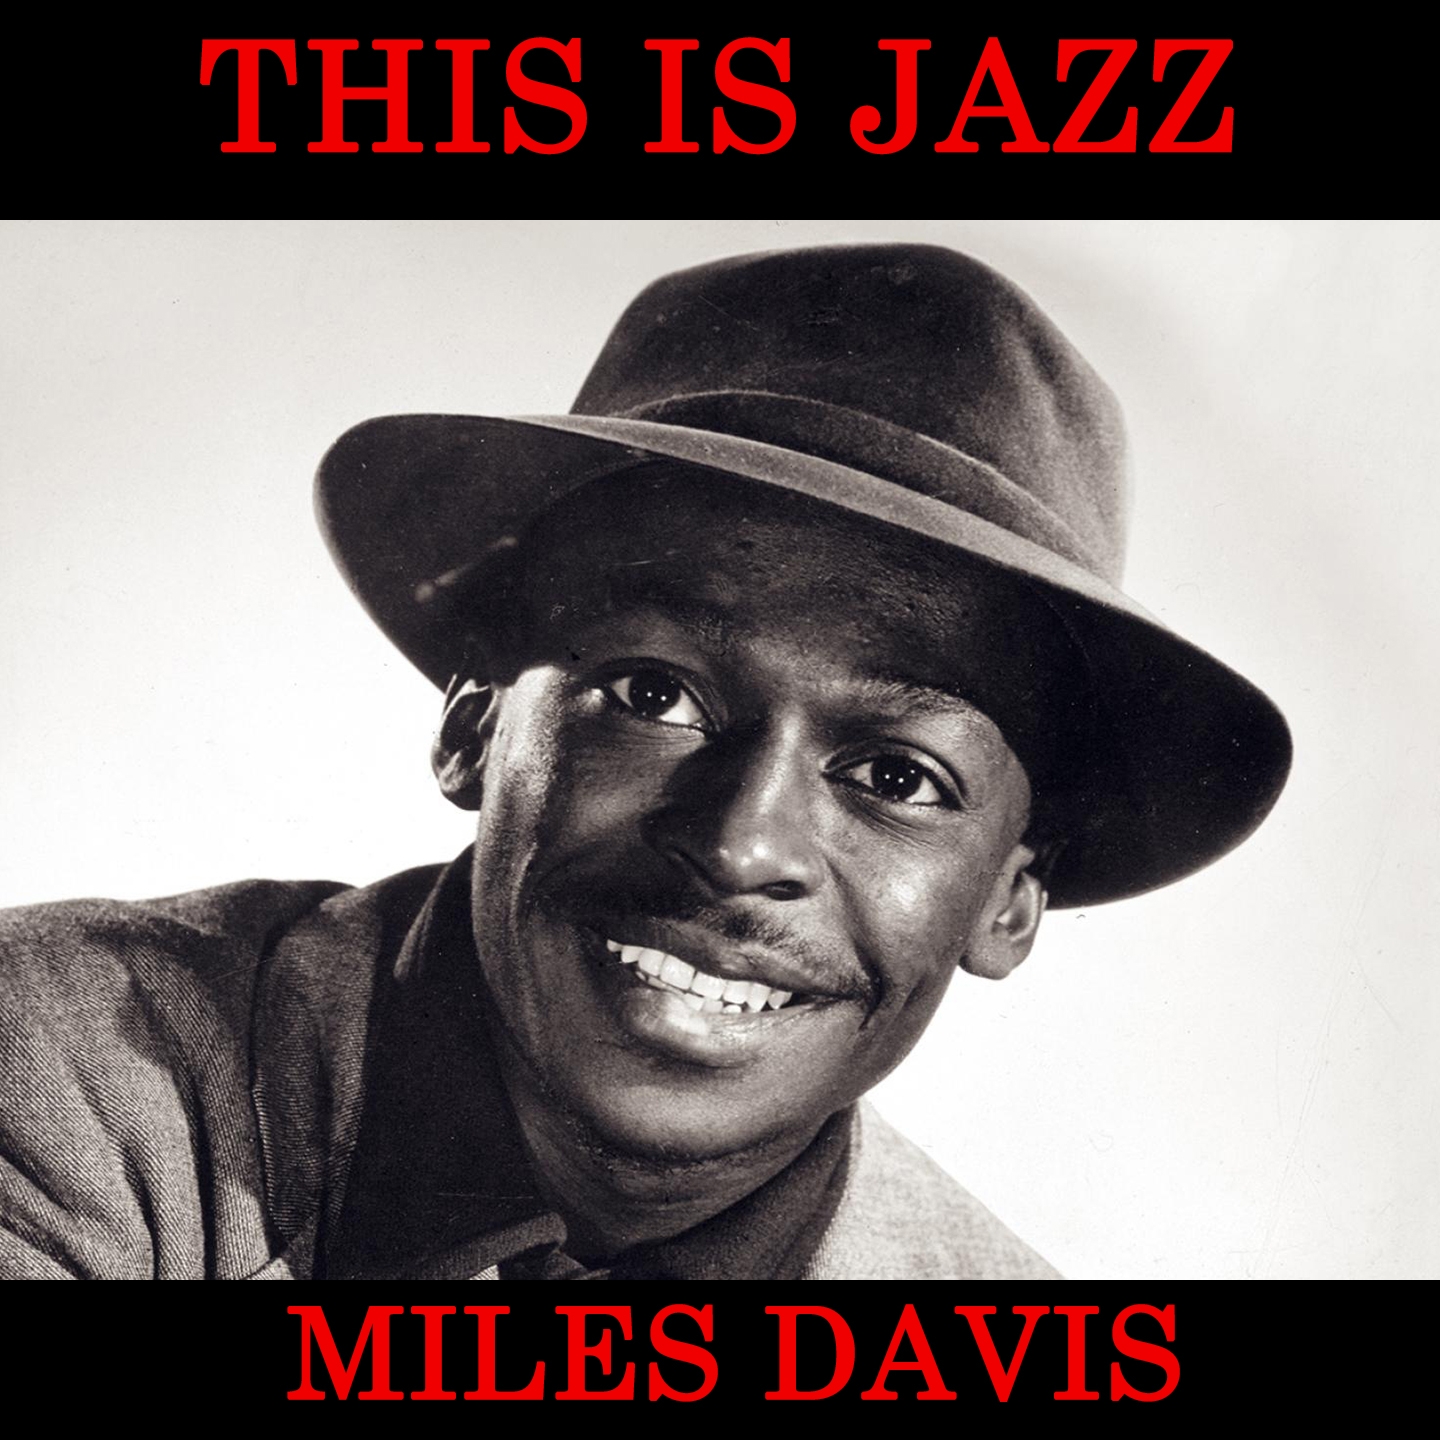 This Is Jazz by Miles Davis Vol. 2